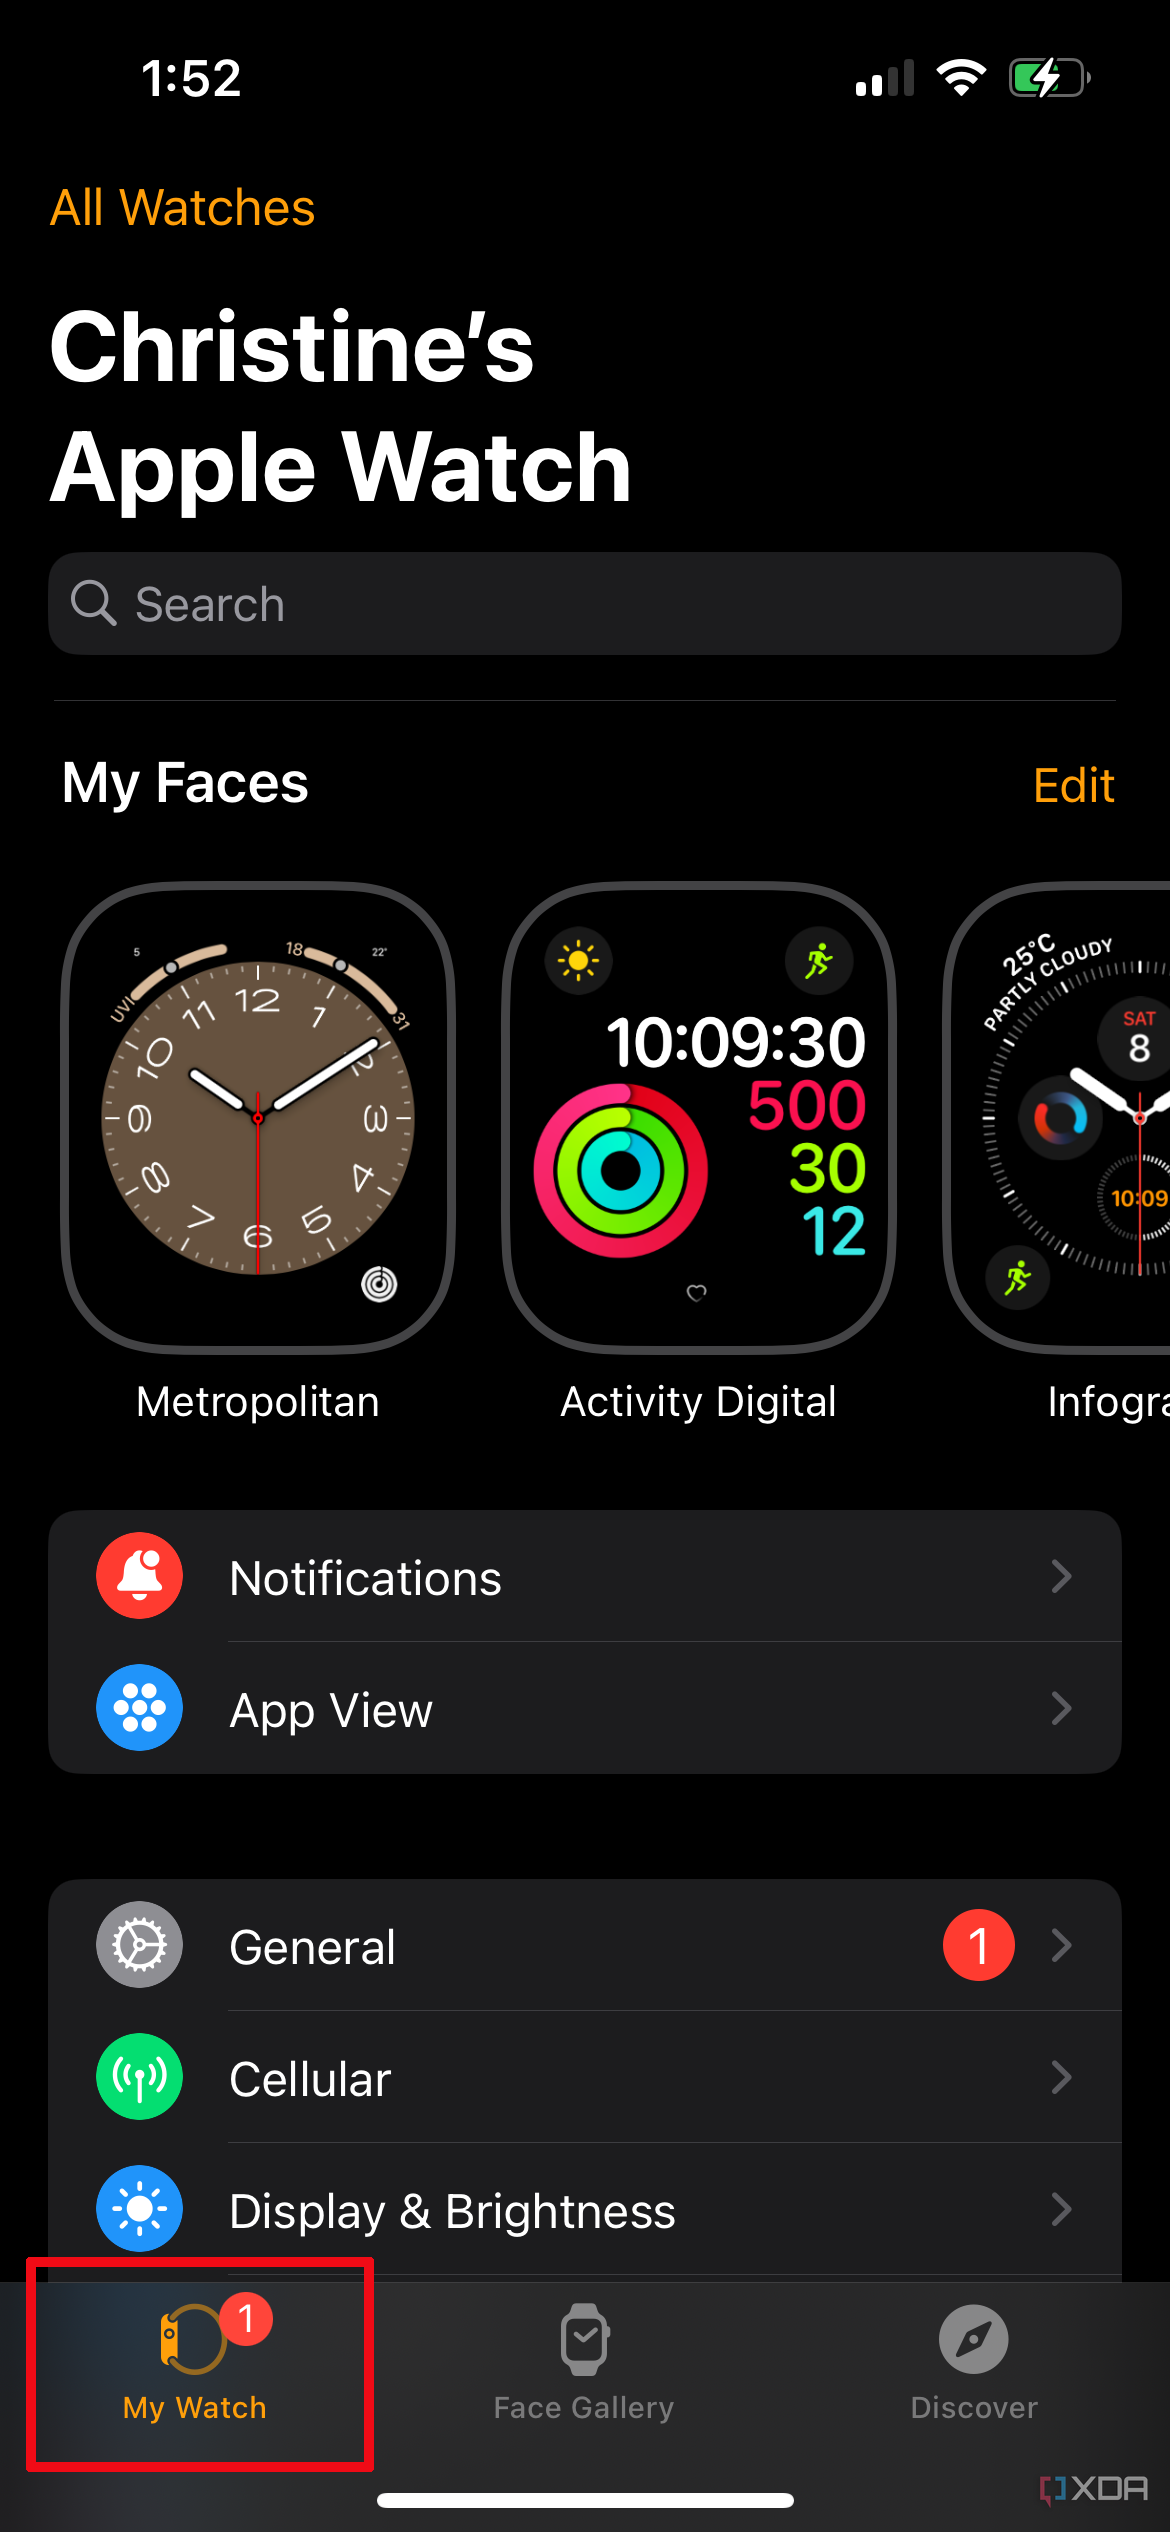 Apple Watch app homepage on iPhone with My Watch selected.